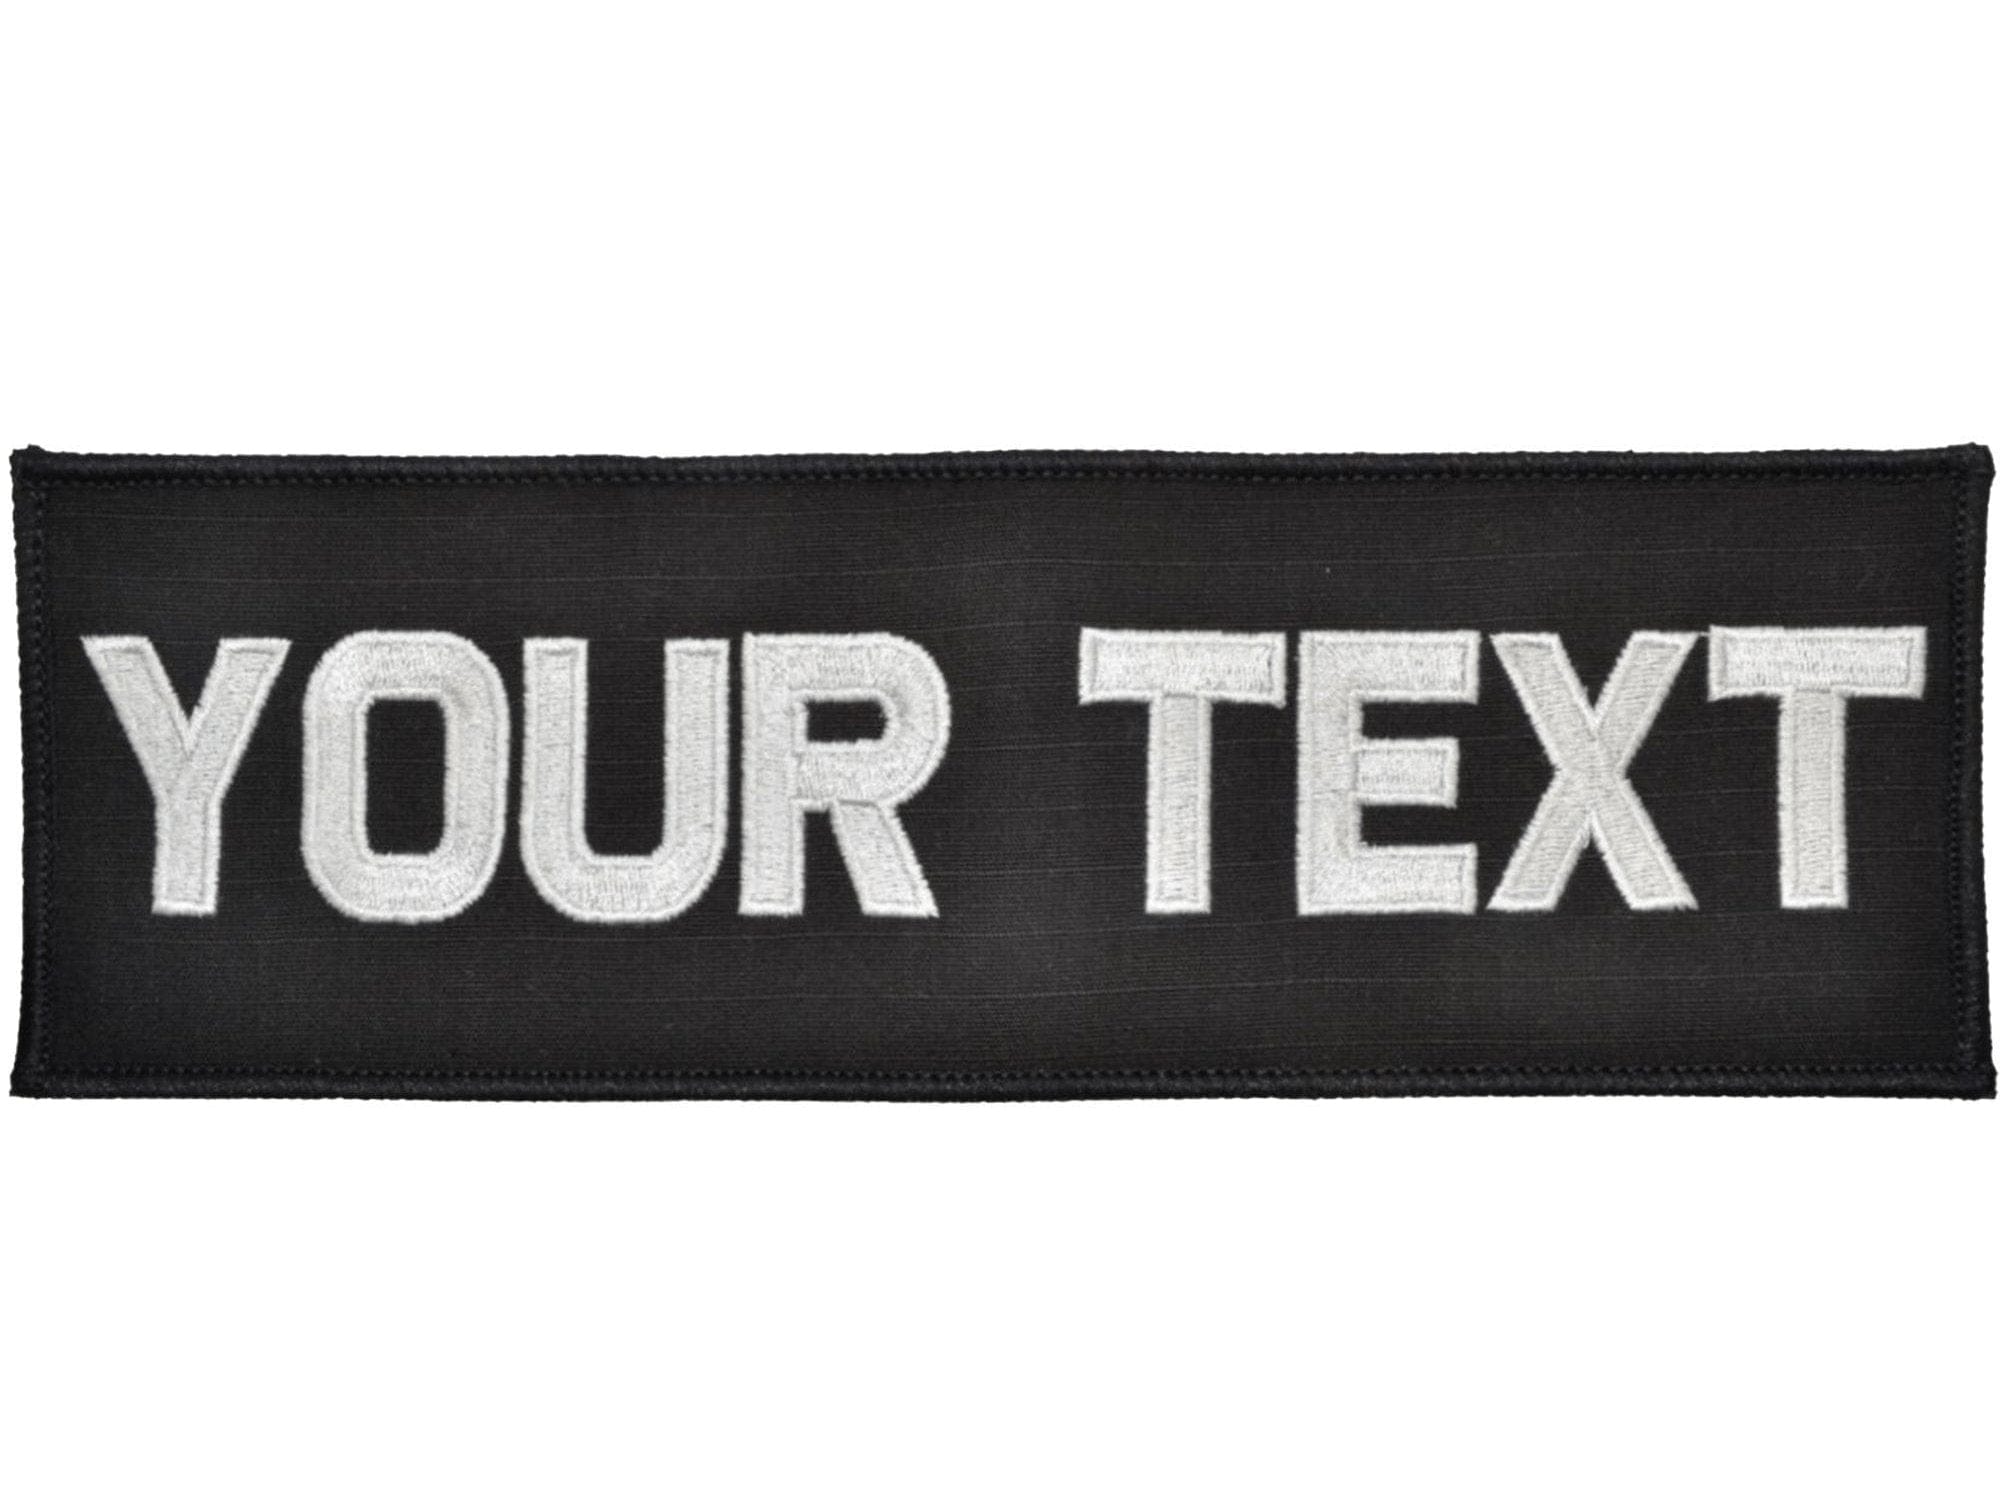 Custom Plate Carrier Text Patch - 2x6